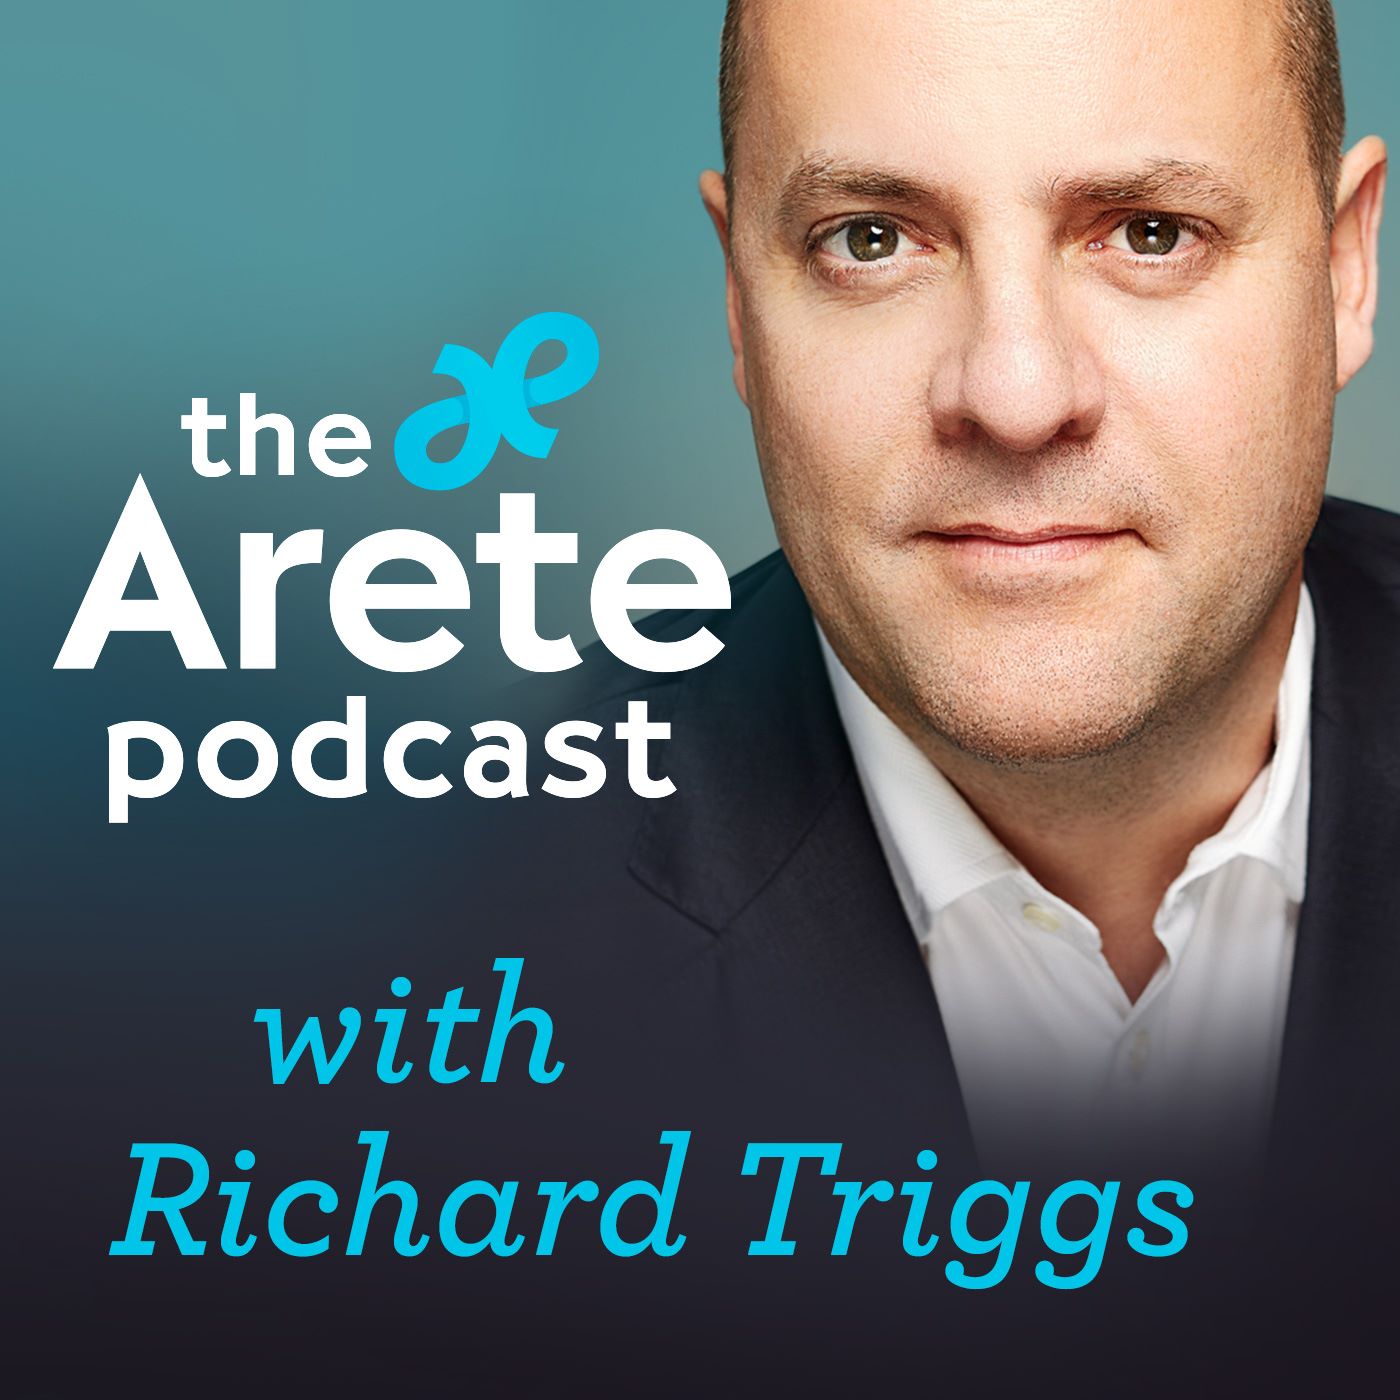 Arete Podcast with Richard Triggs